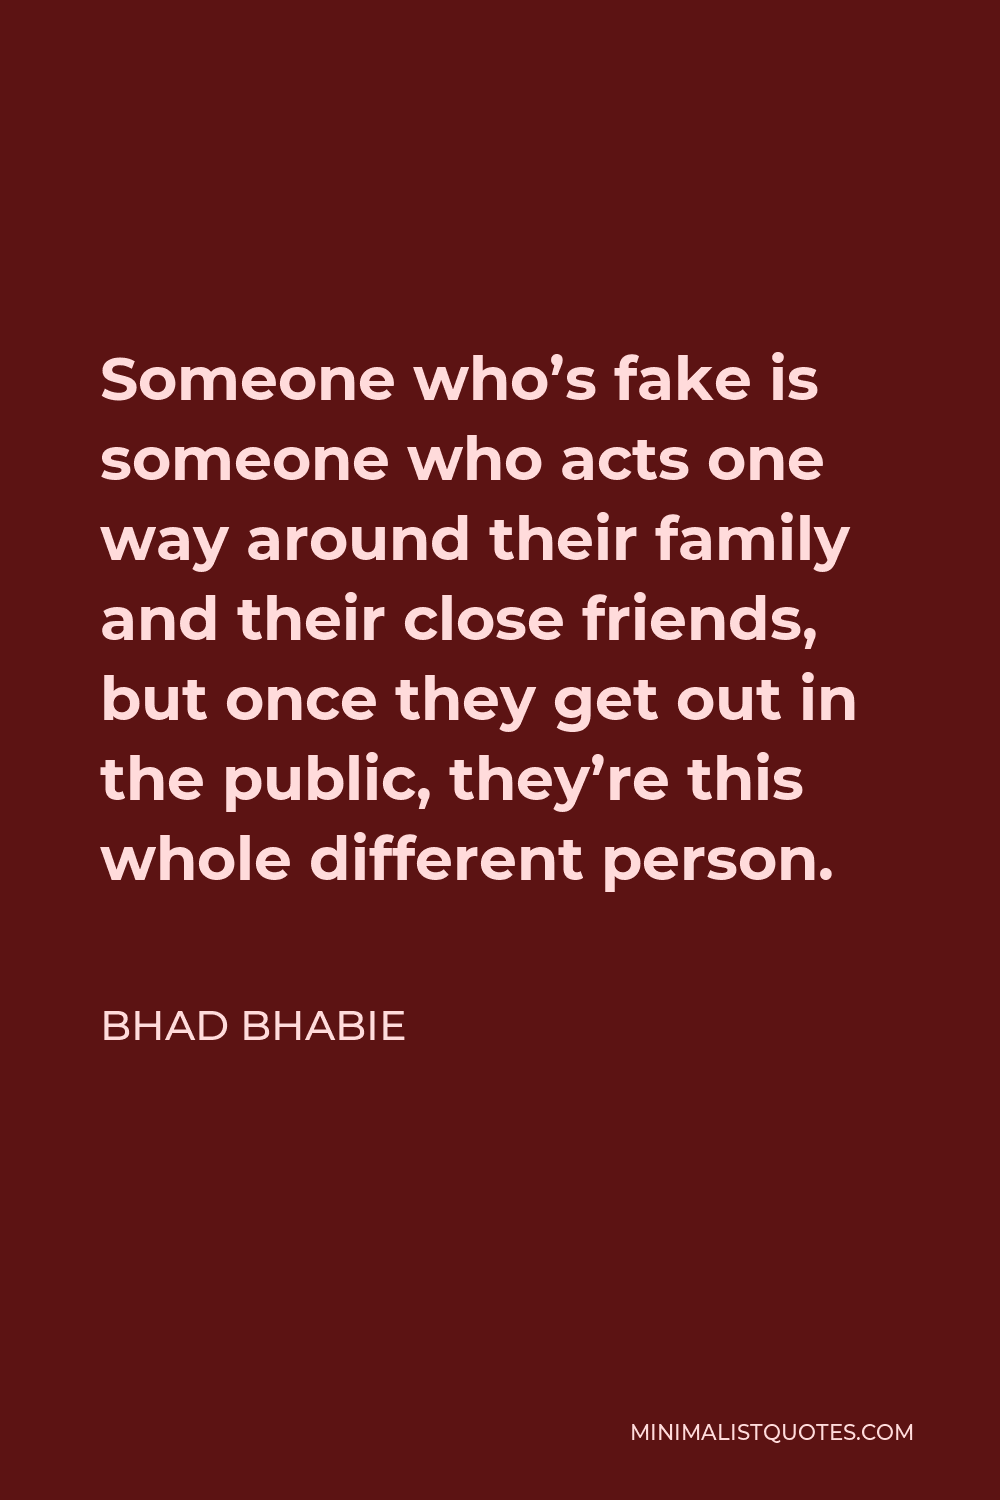 Bhad Bhabie Quote - Someone who’s fake is someone who acts one way around their family and their close friends, but once they get out in the public, they’re this whole different person.